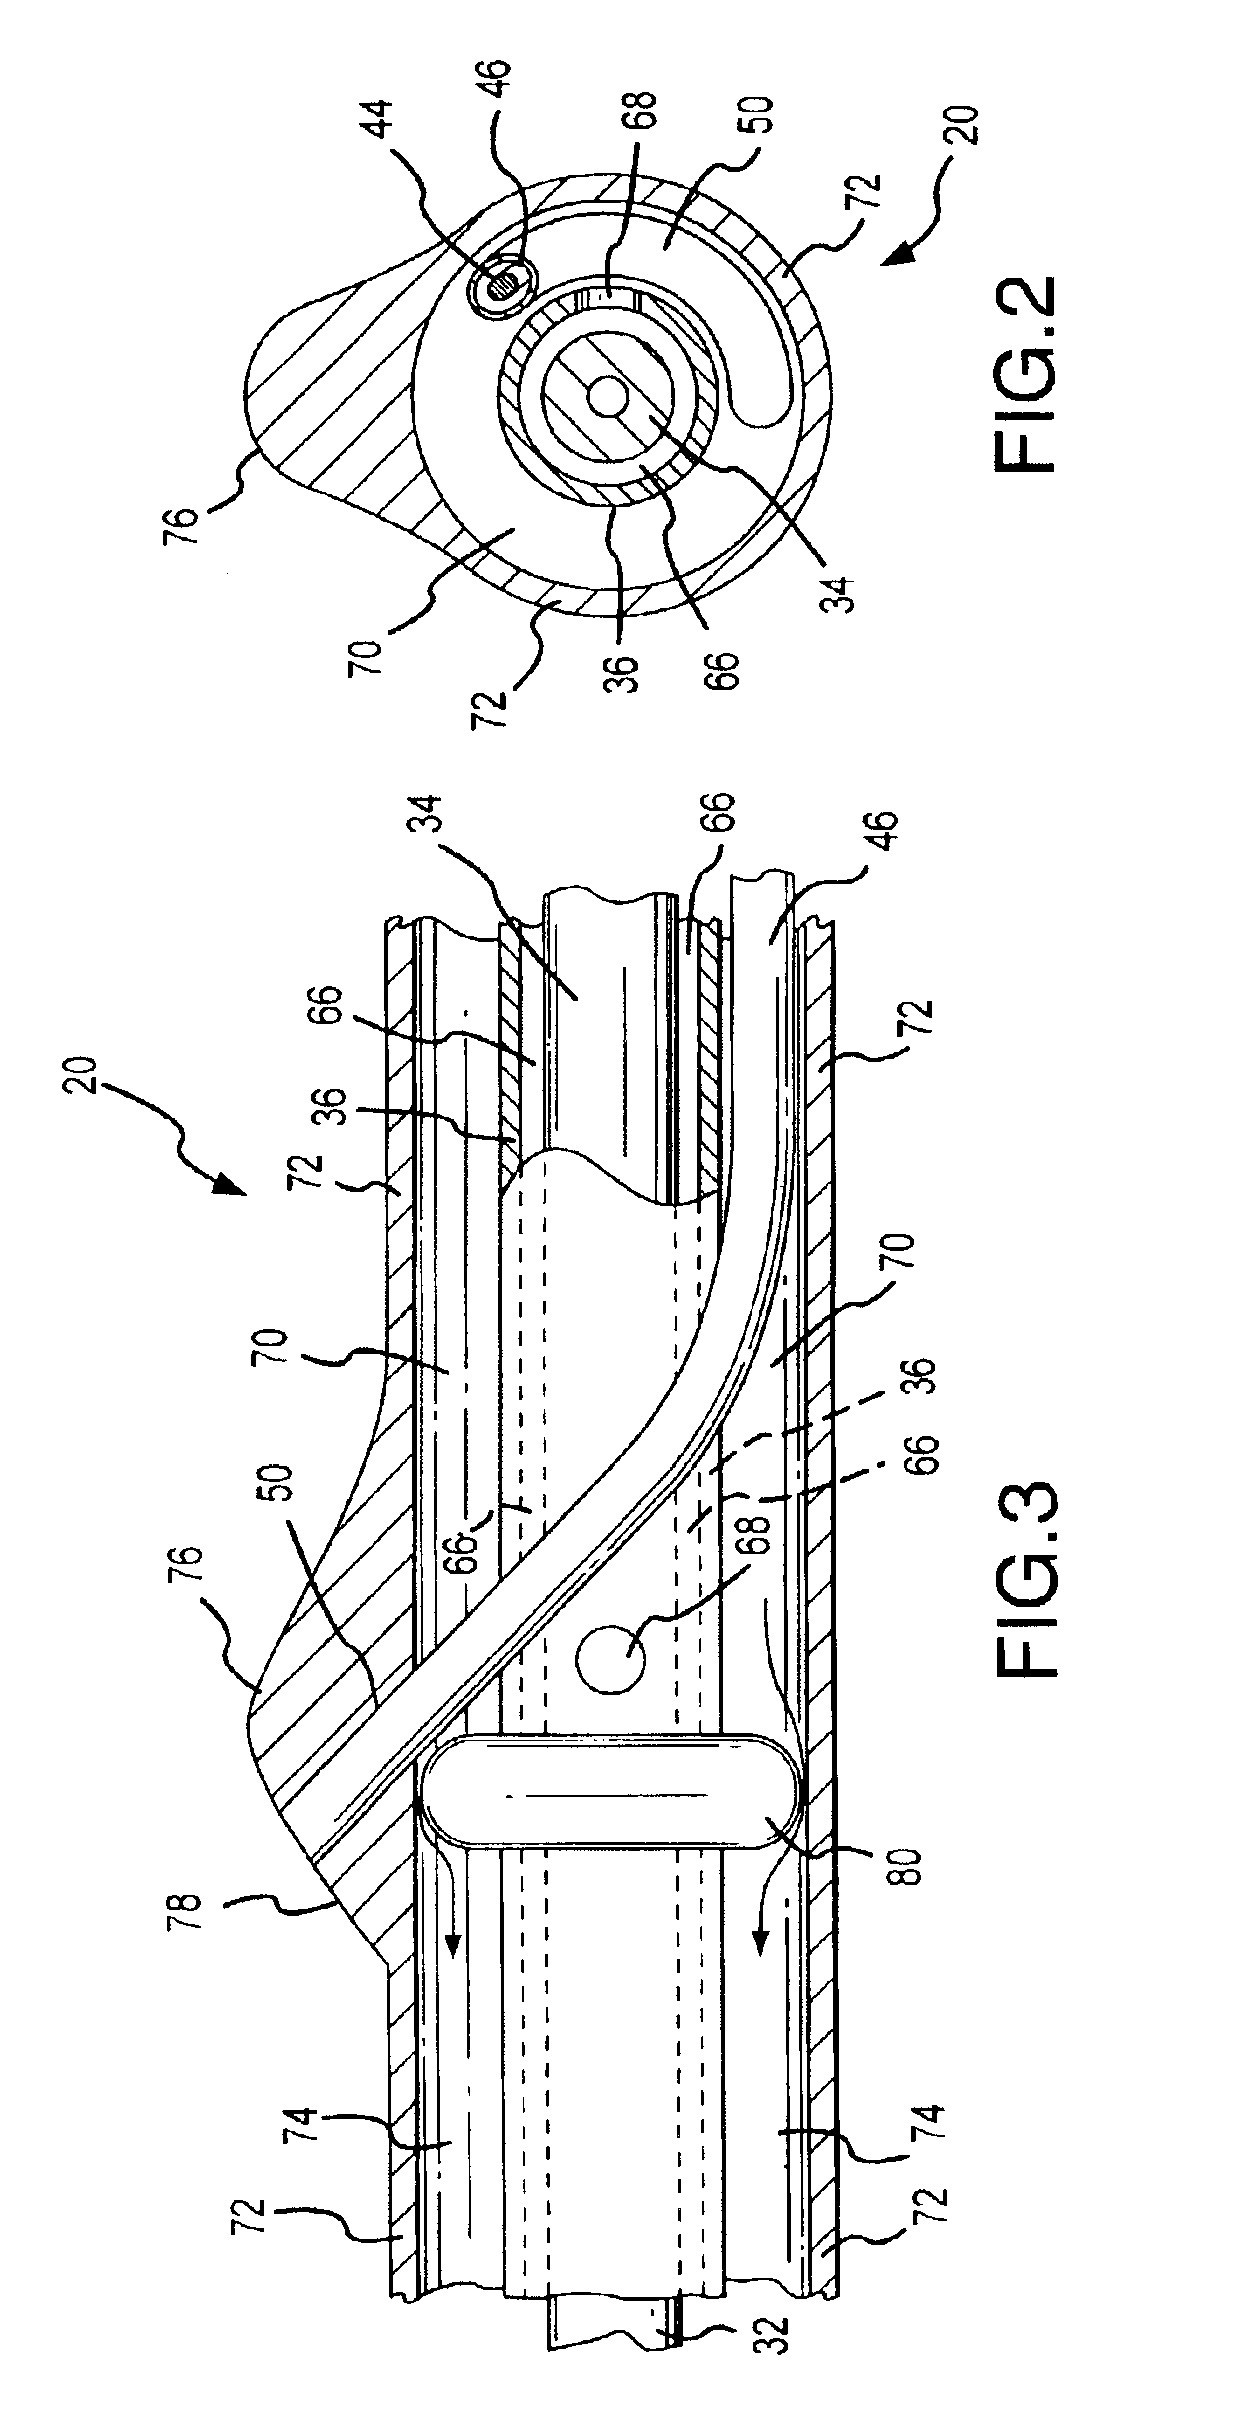 Thermotherapy catheter and method of prostate thermotherapy with improved guide and heat confinement